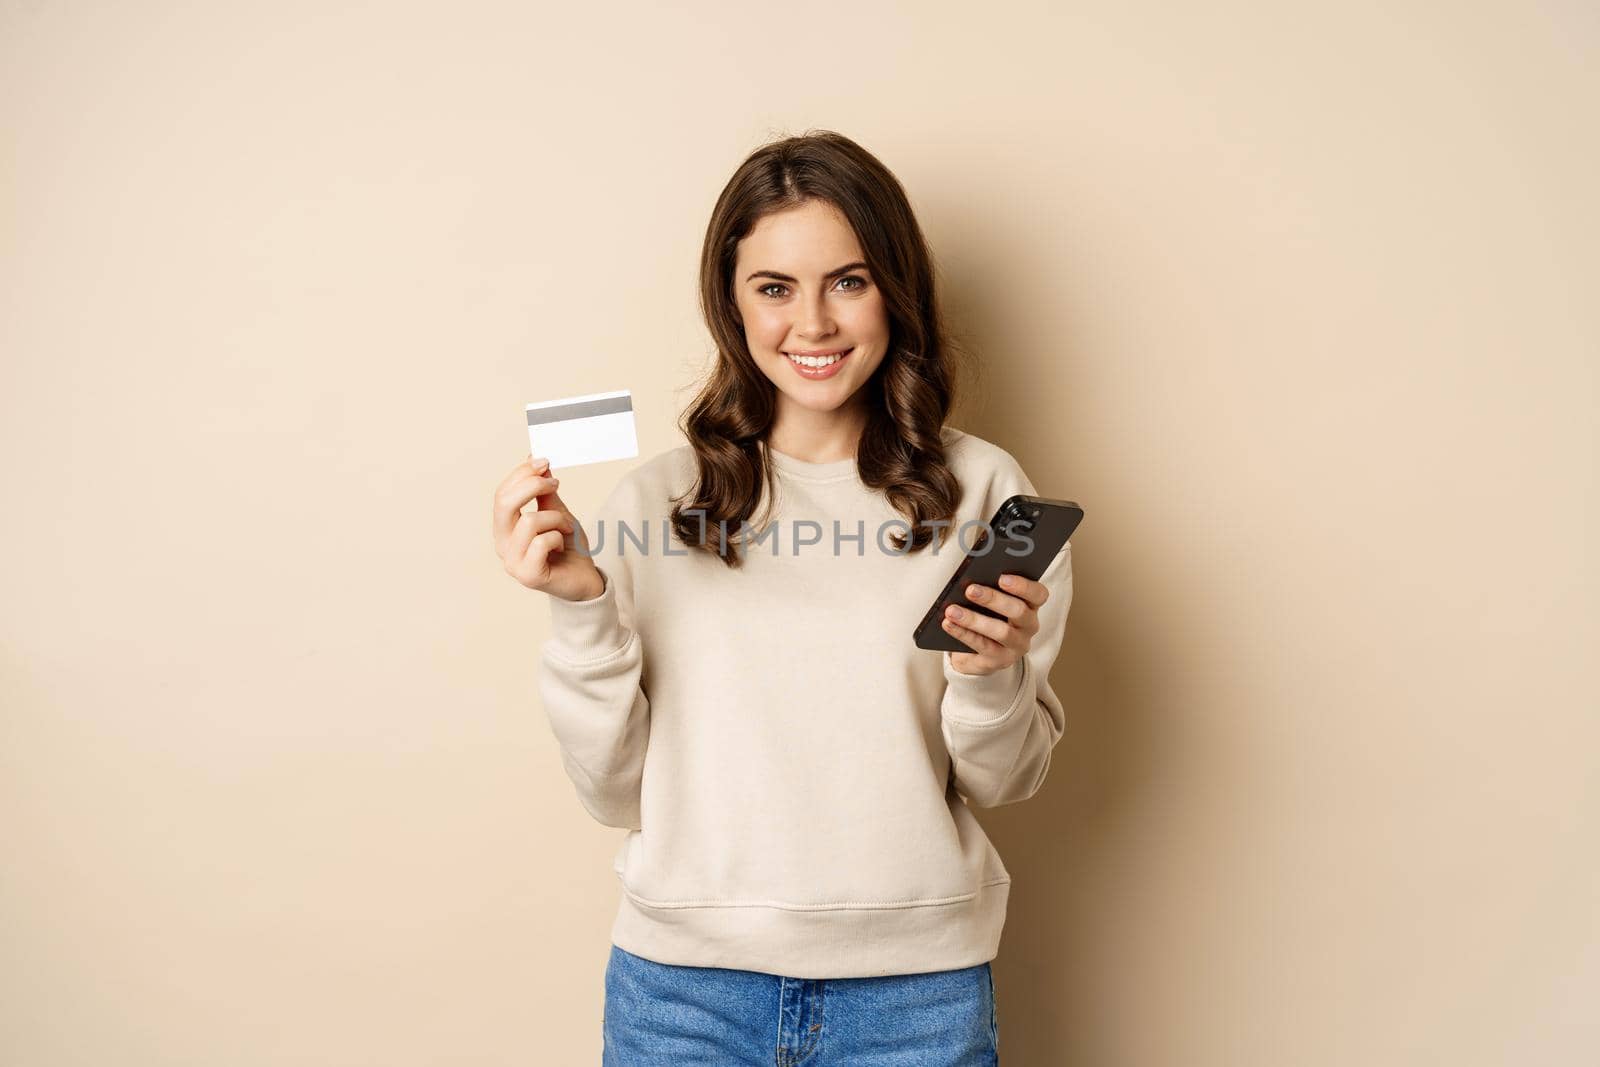 Online shopping. Smiling brunette woman showng credit card, using smartphone app, standing over beige background.